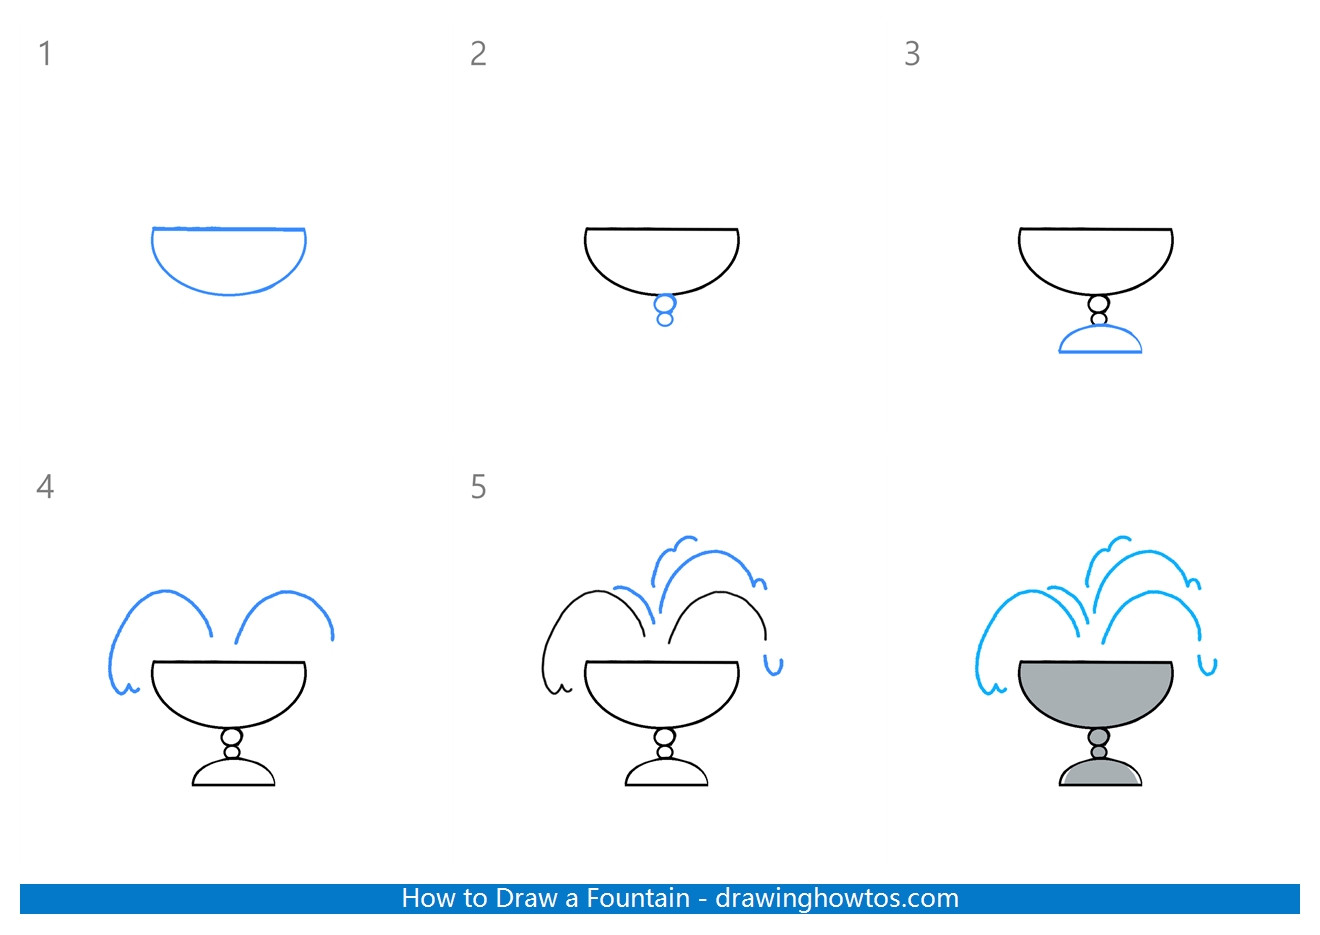 How to Draw a Simple Fountain Step by Step